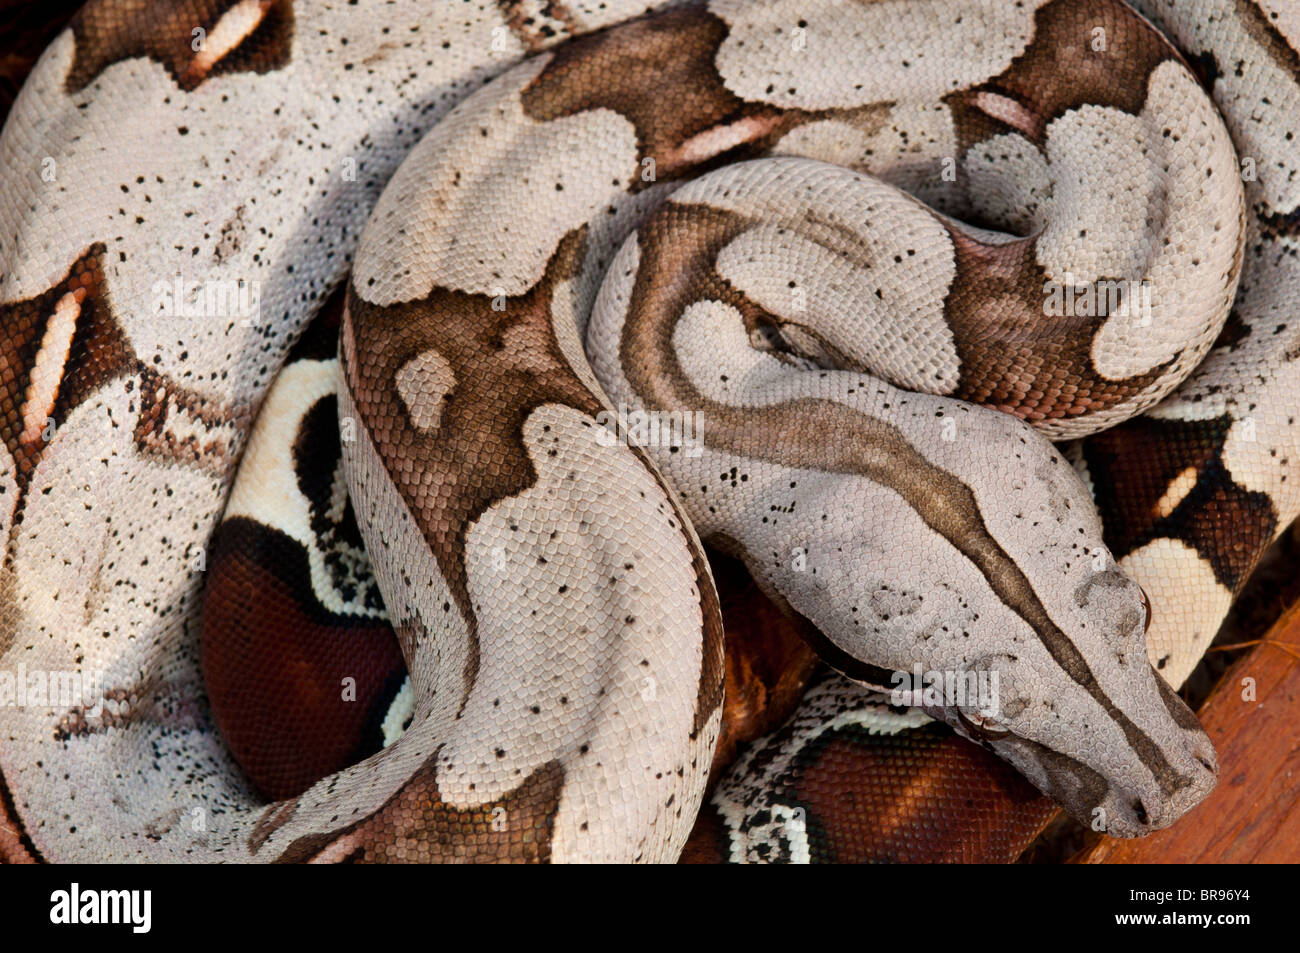 Junge Red Tailed Boa Constrictor aus Surinam Stockfoto